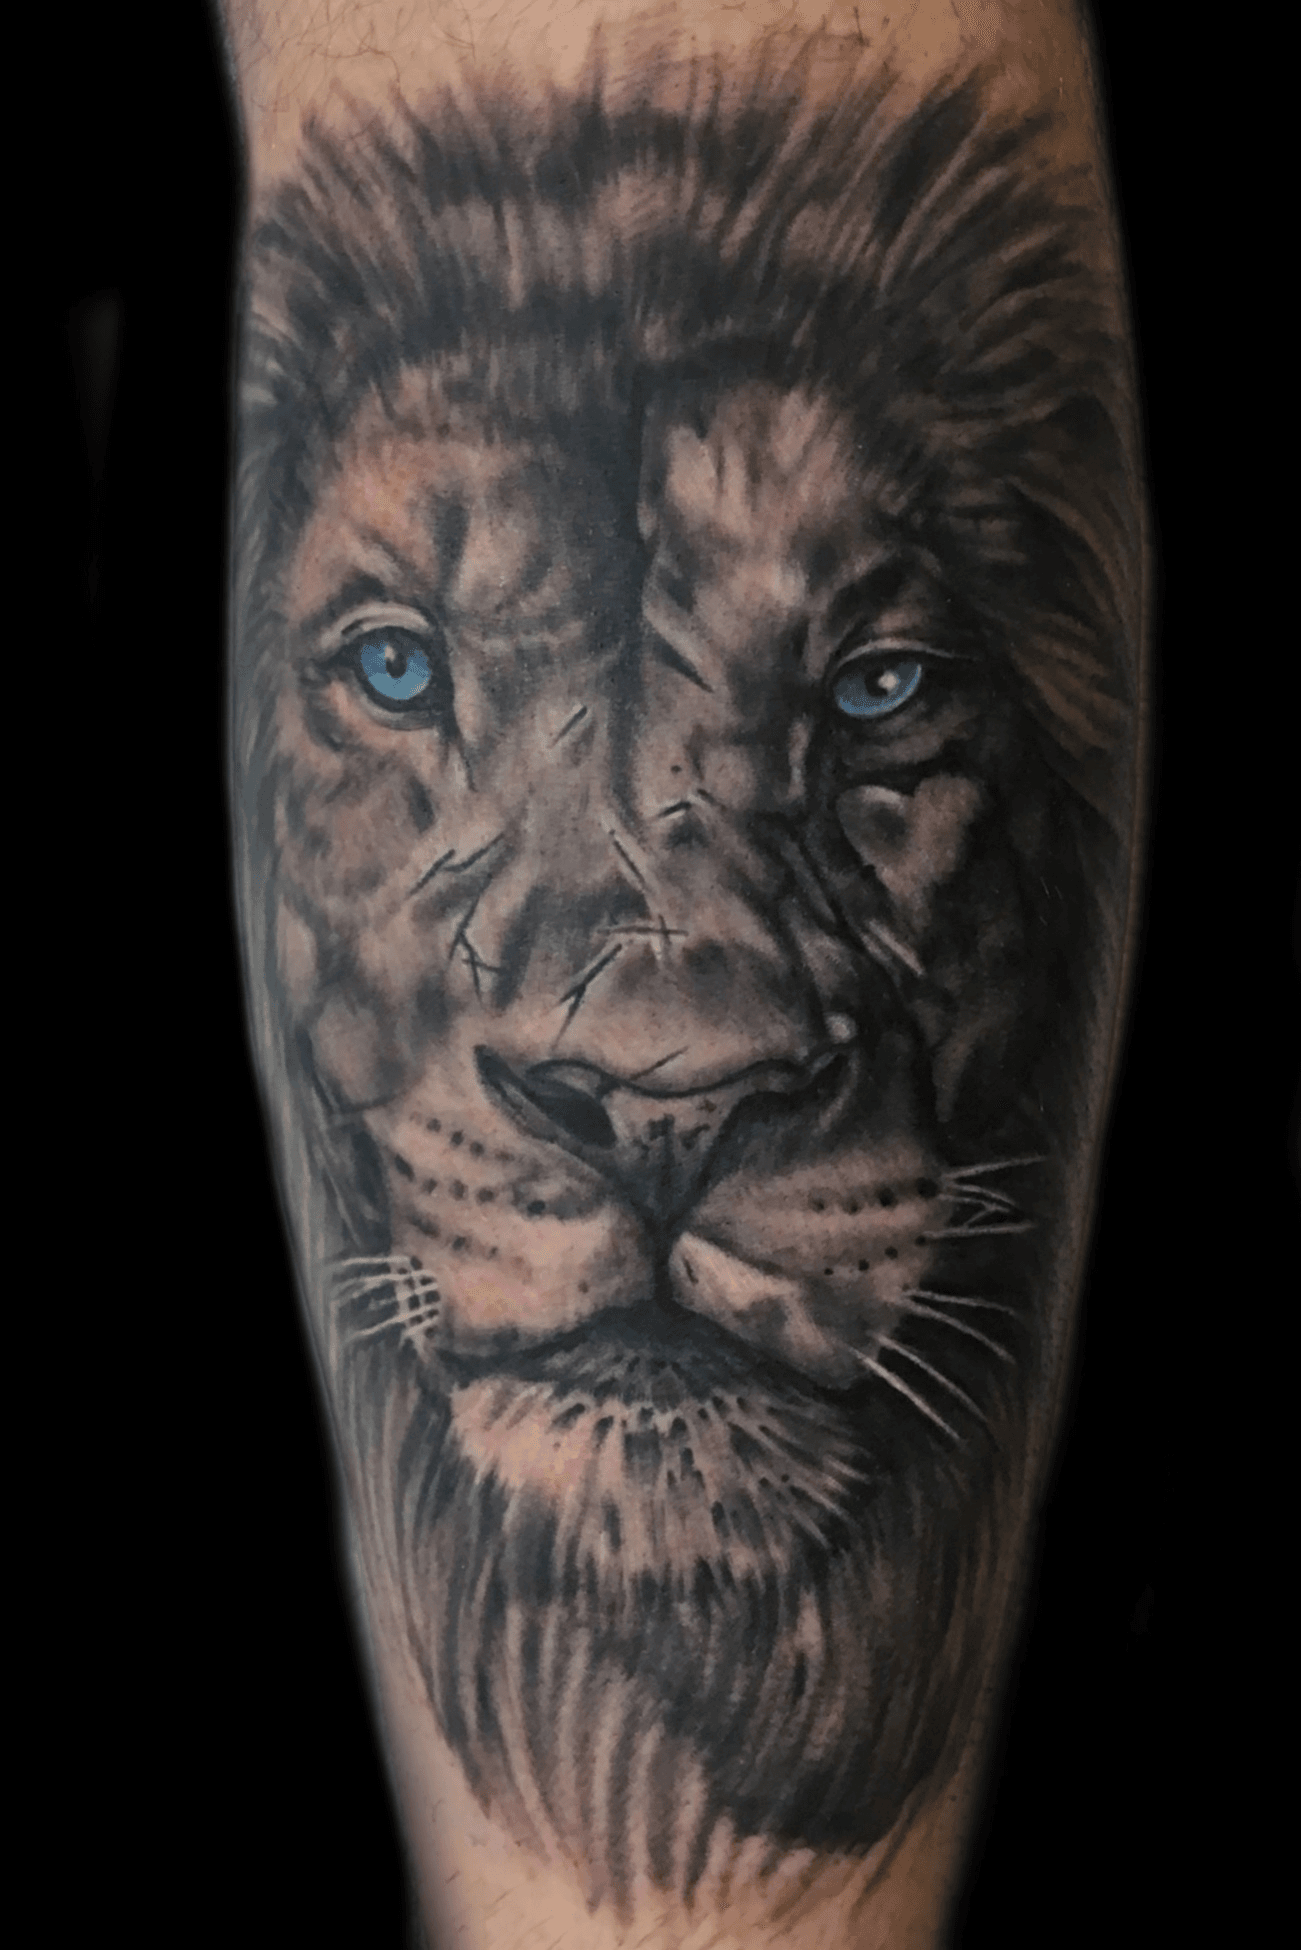 Create Tattoo  Sketchy lion with crown  sketchstyle sketch  sketchytattoo coloraccent liontattoo lion scar blood crown ink  tattoo createtattoo  Facebook